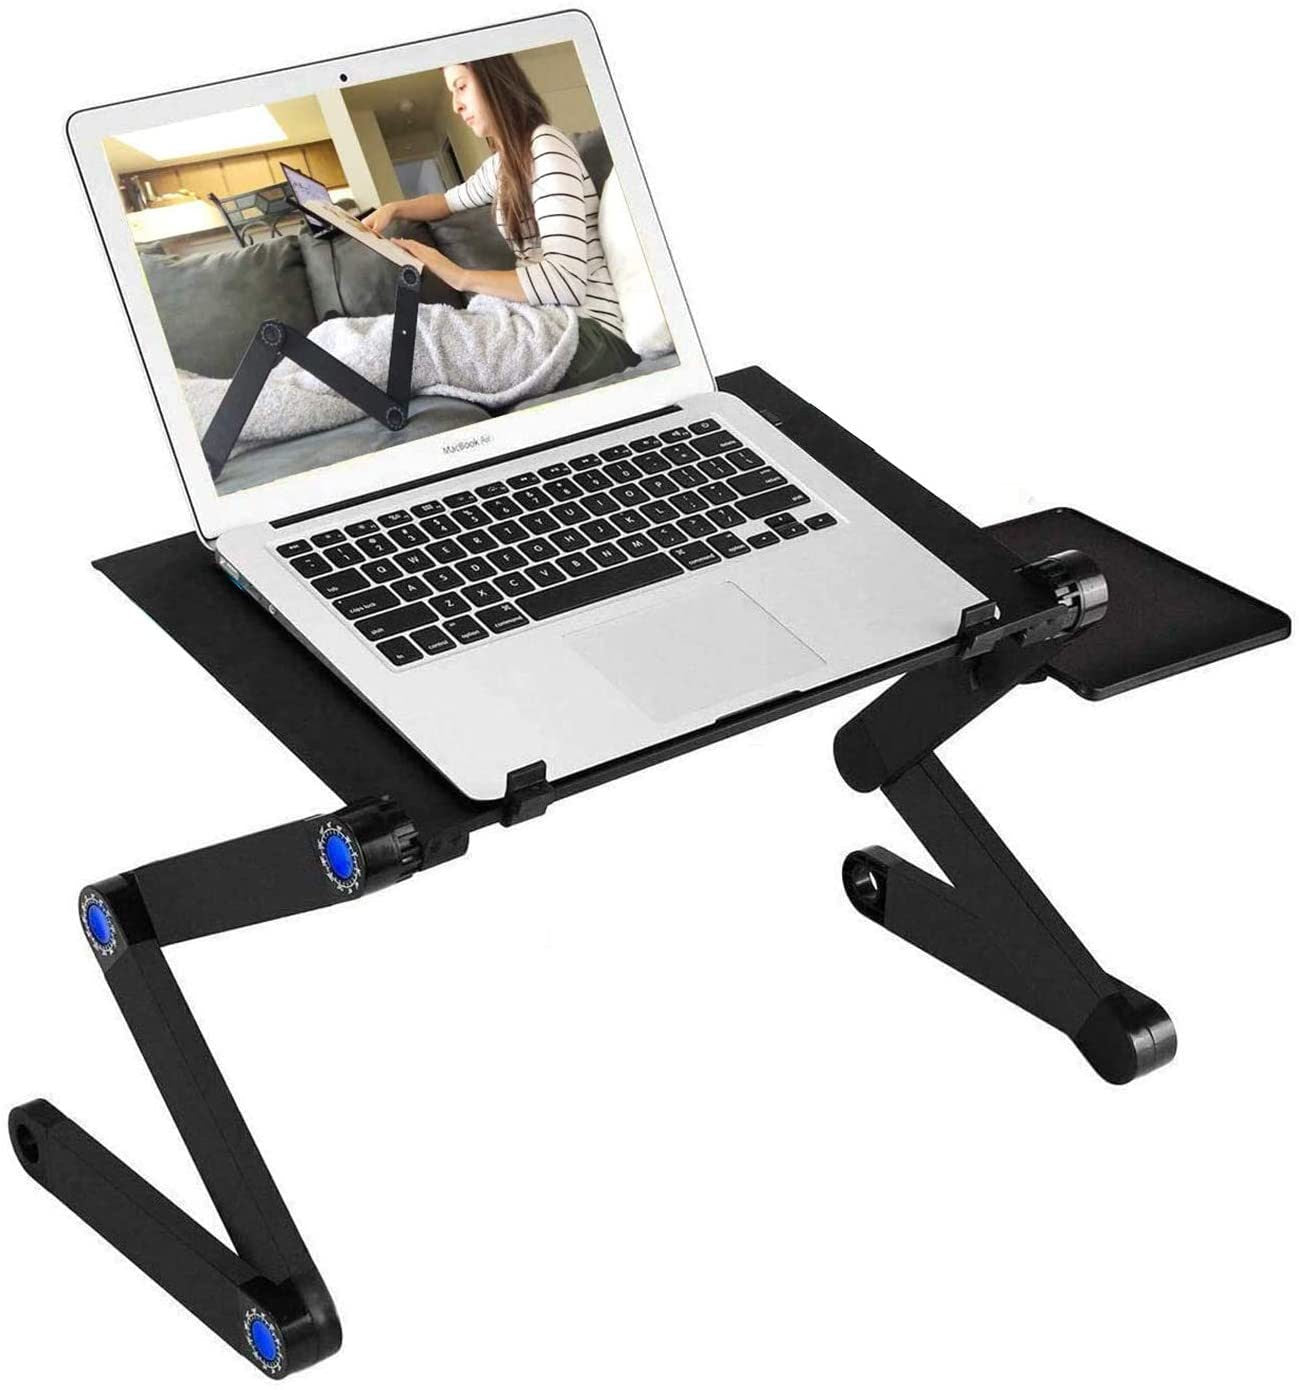 Adjustable Laptop Desk;  RAINBEAN Laptop Stand for Bed Portable Lap Desk Foldable Table Workstation Notebook Riser with Mouse Pad;  Ergonomic Computer Tray Reading Holder Bed Tray Standing Desk